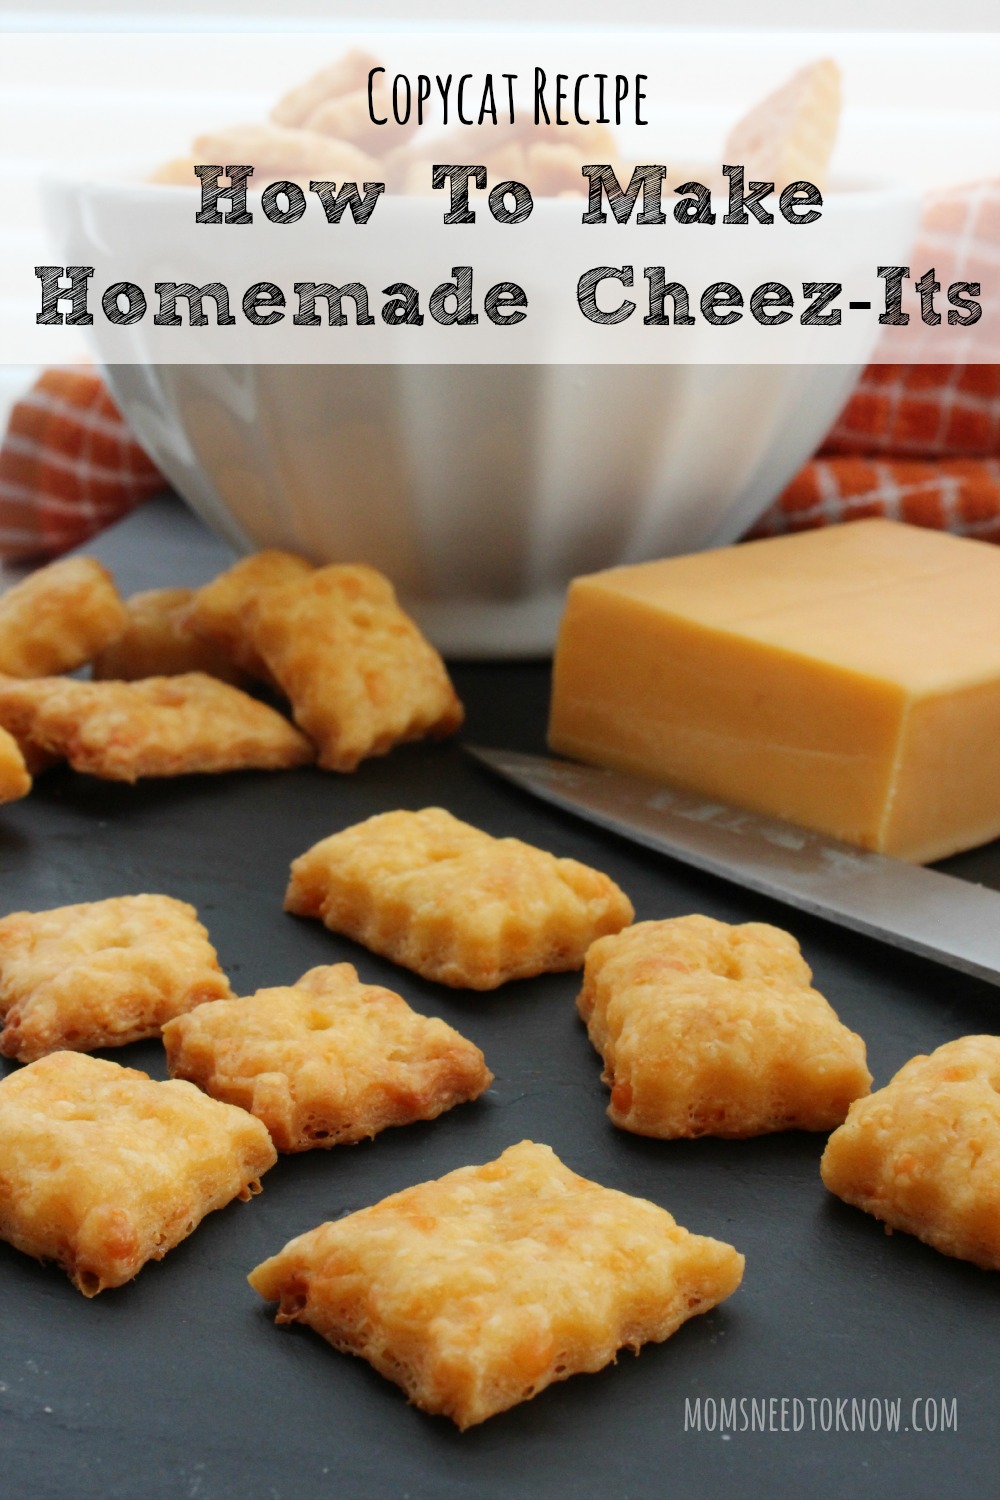 How To Make Homemade Cheez-Its